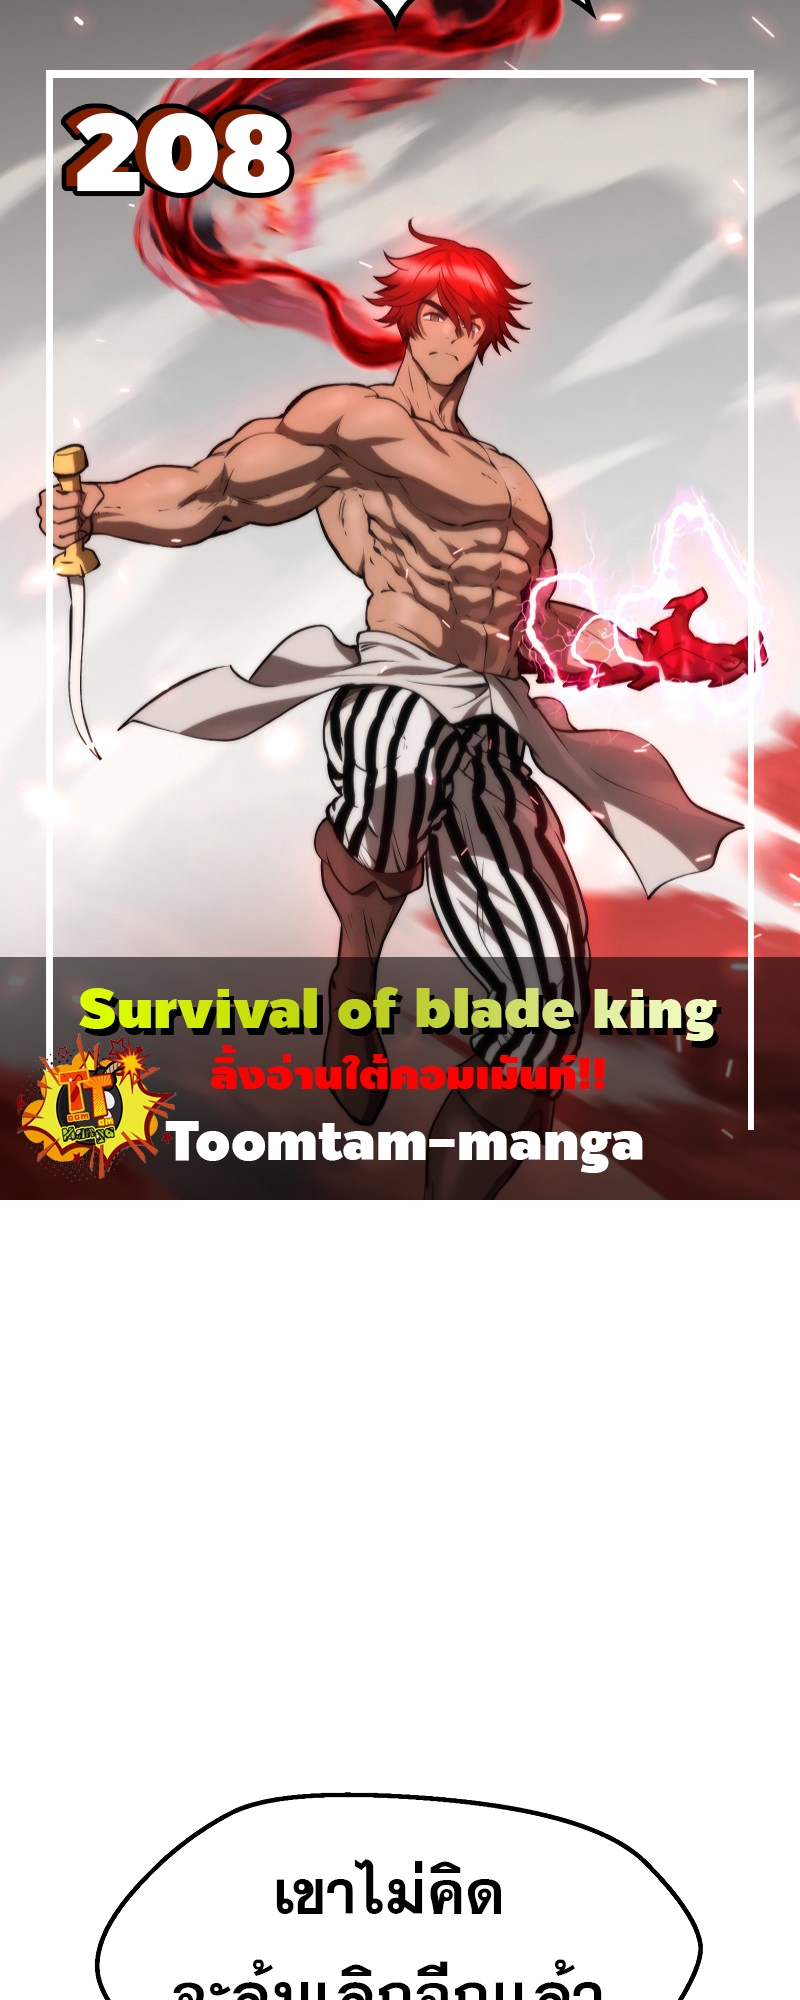 Survival of blade king 208 1 06 25670001